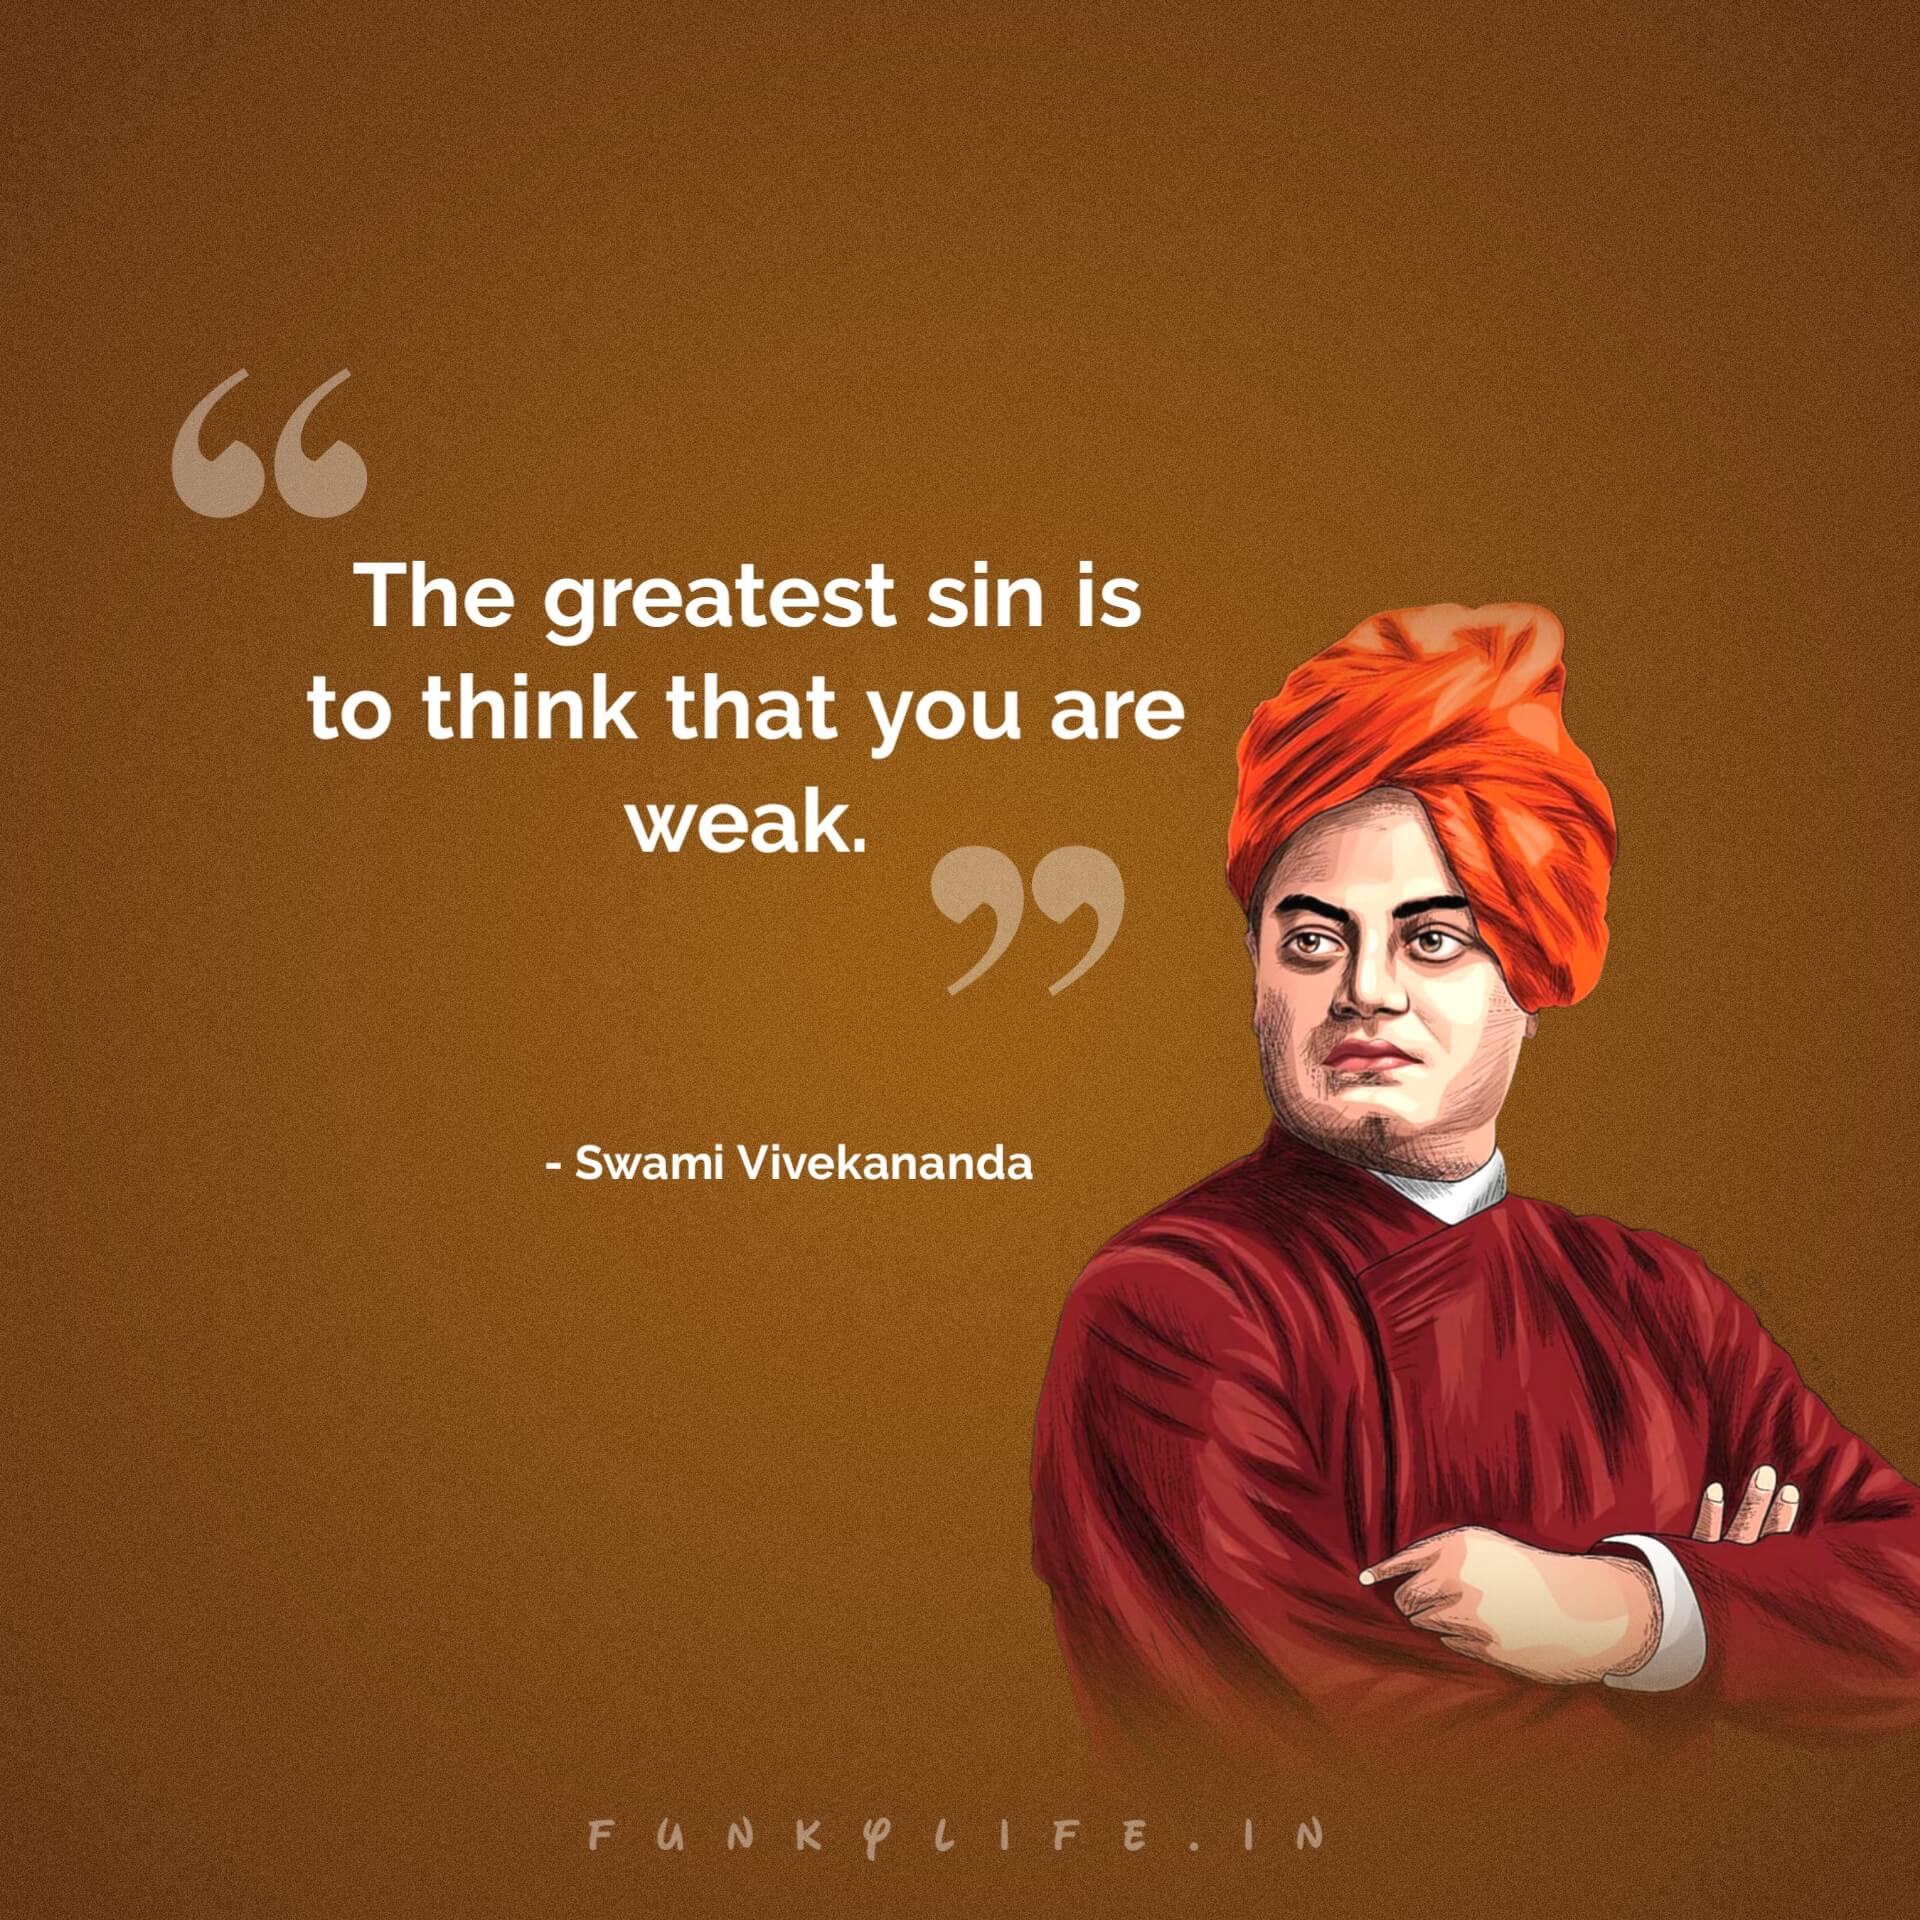 Swami Vivekananda Quotes in English
on Strength 